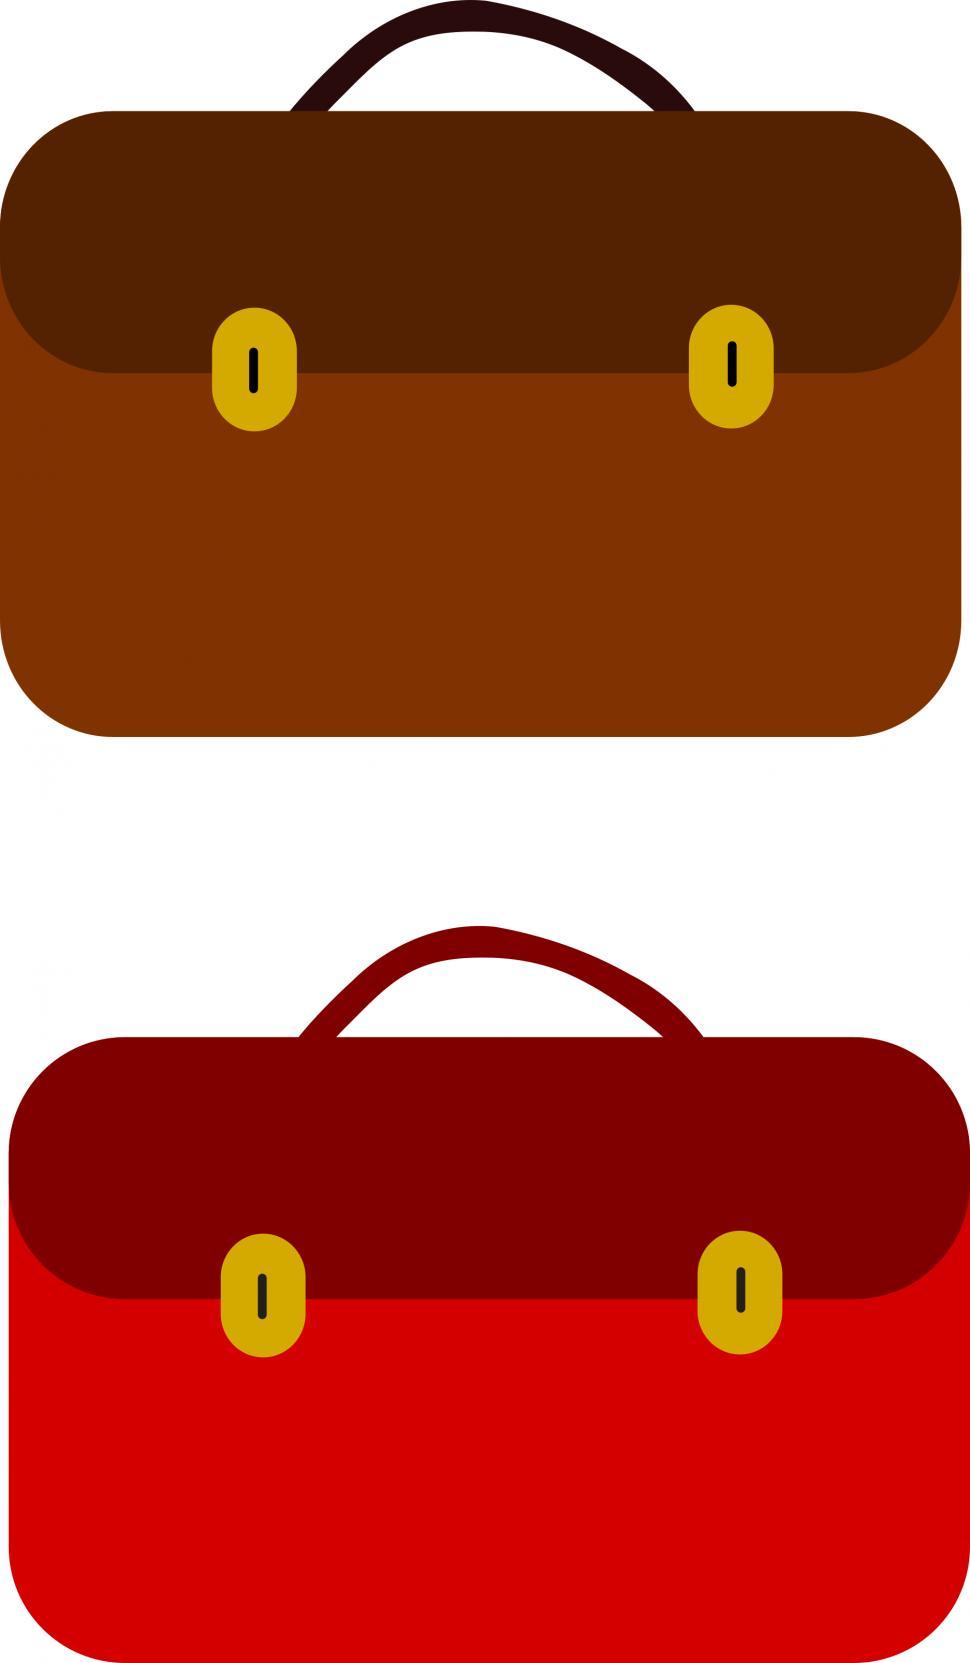 Free Image of Simple illustration of a briefcase isolated on a white background  